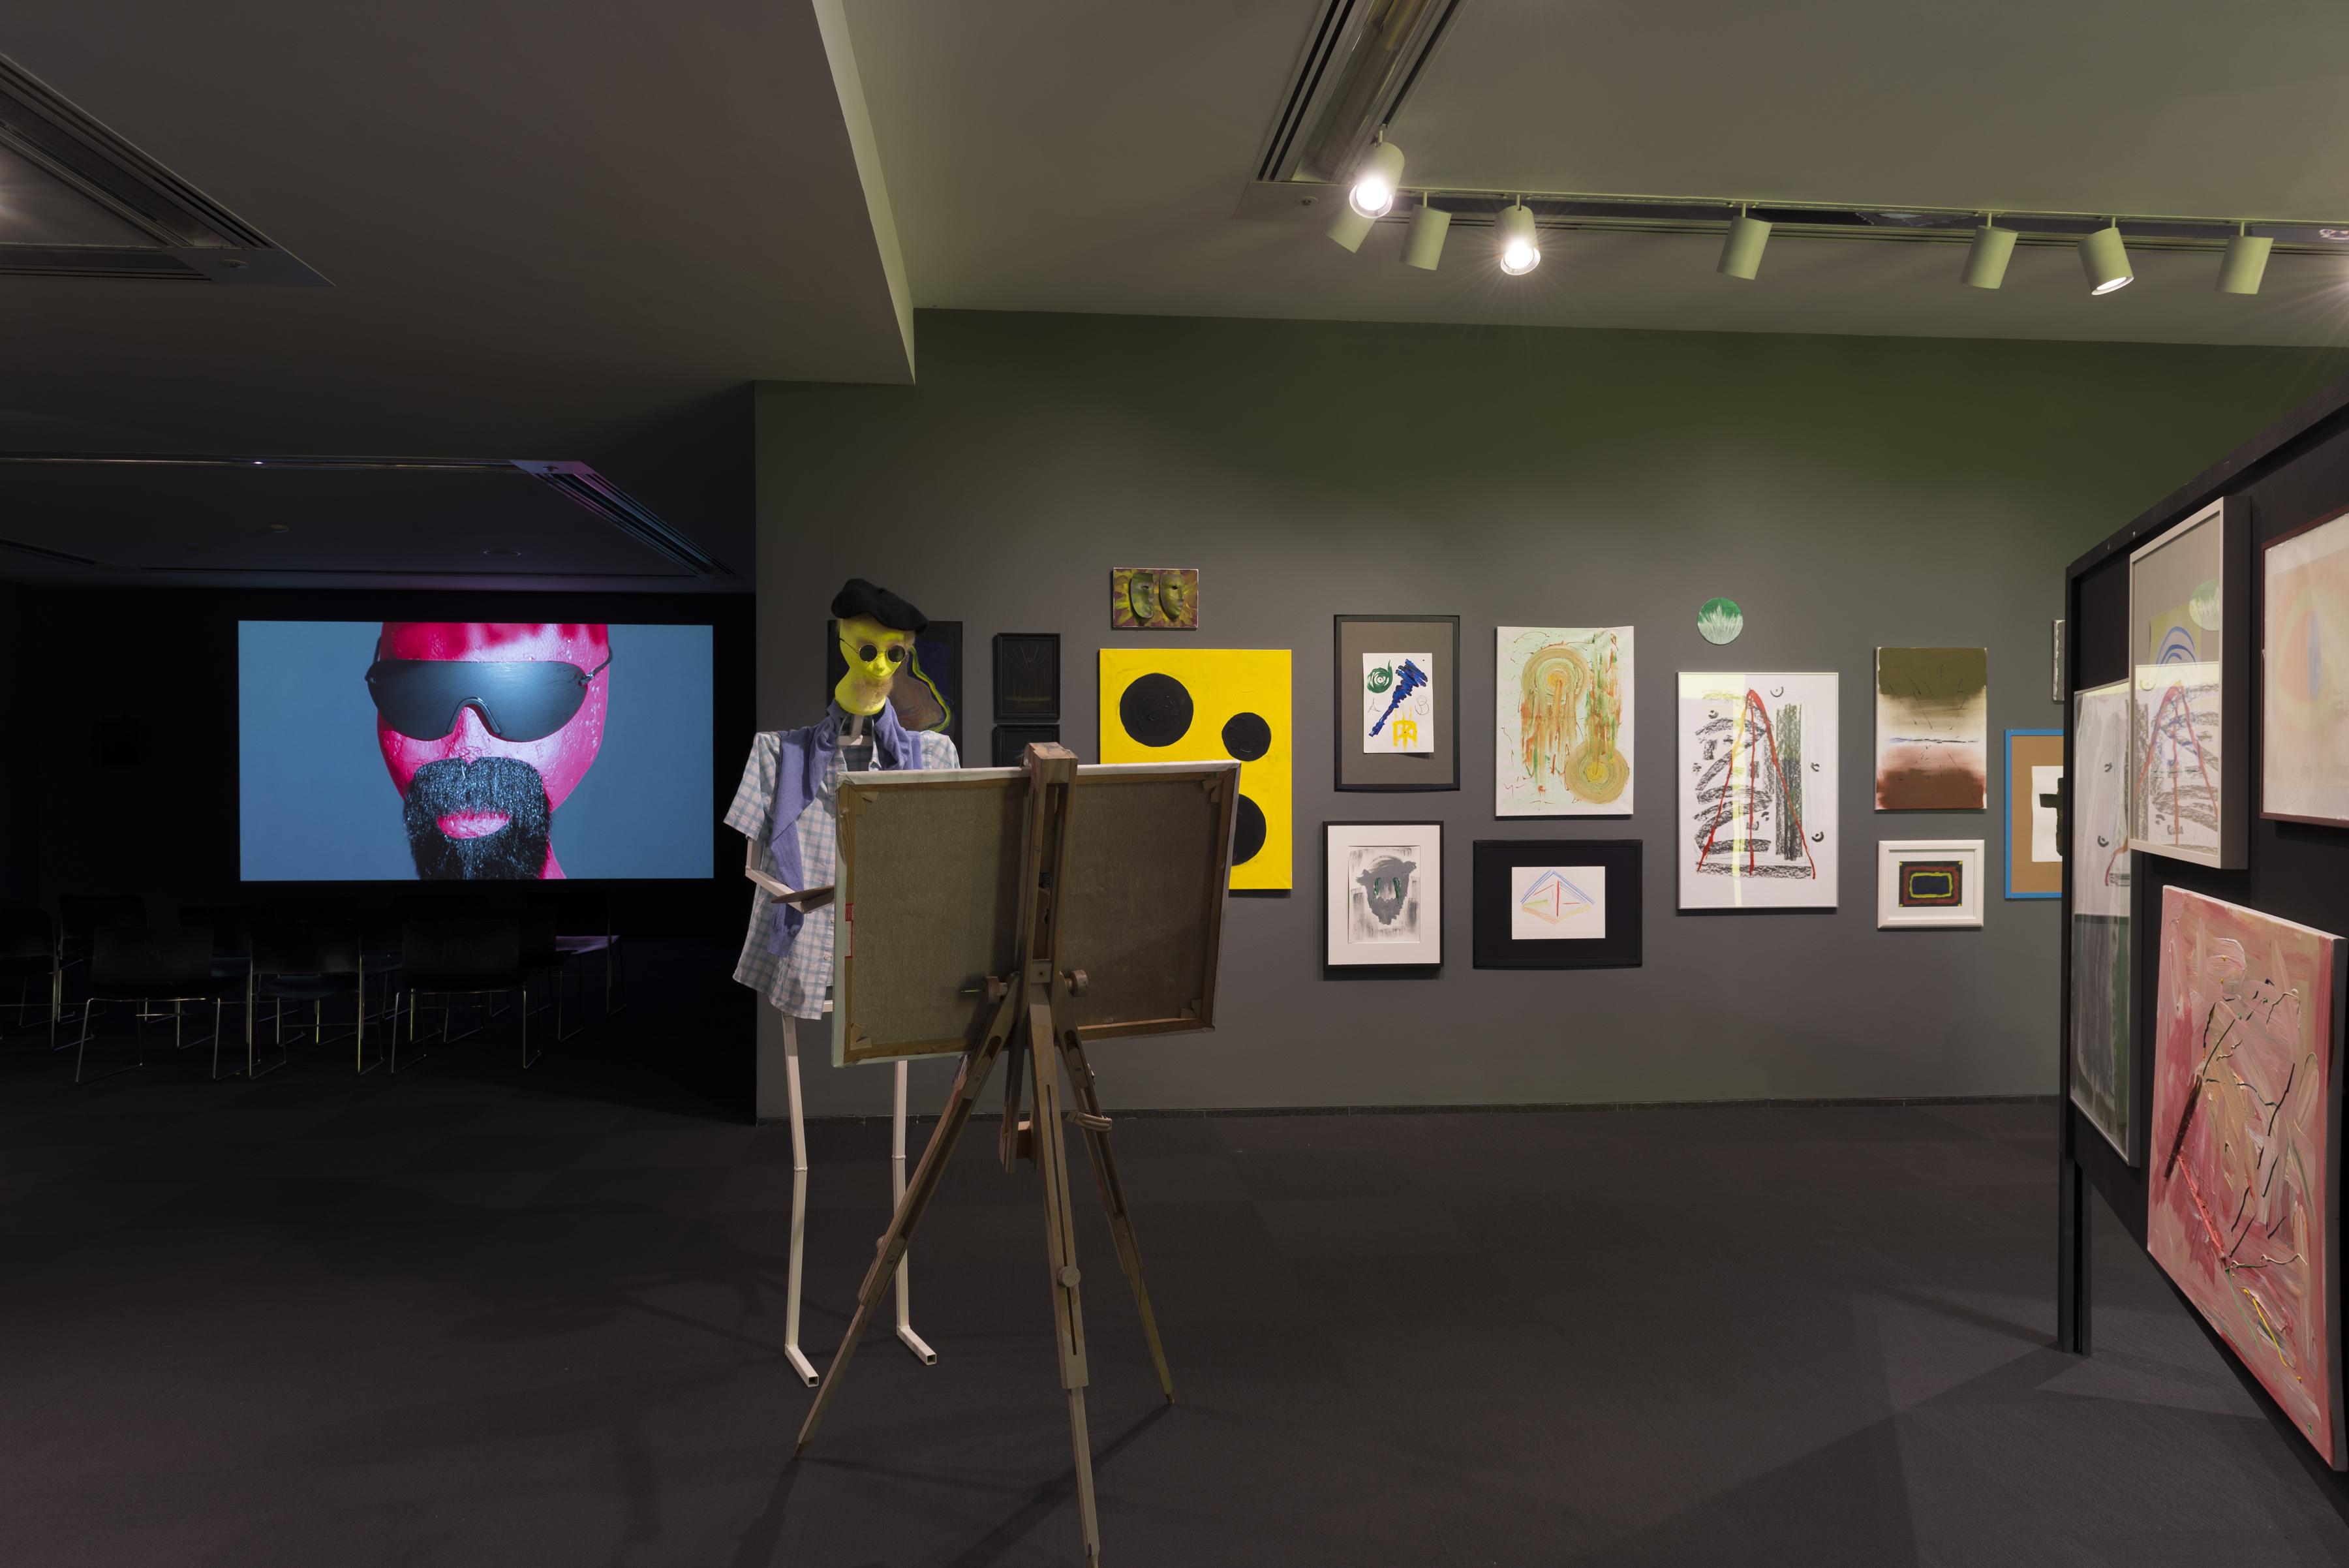 A humanoid figure wearing a beret and plaid shirt stands at an easel holding a paint palette. In the background, there are abstract paintings hung in a cluster on the wall and a video projection of a human doll with a goatee and wearing sunglasses .